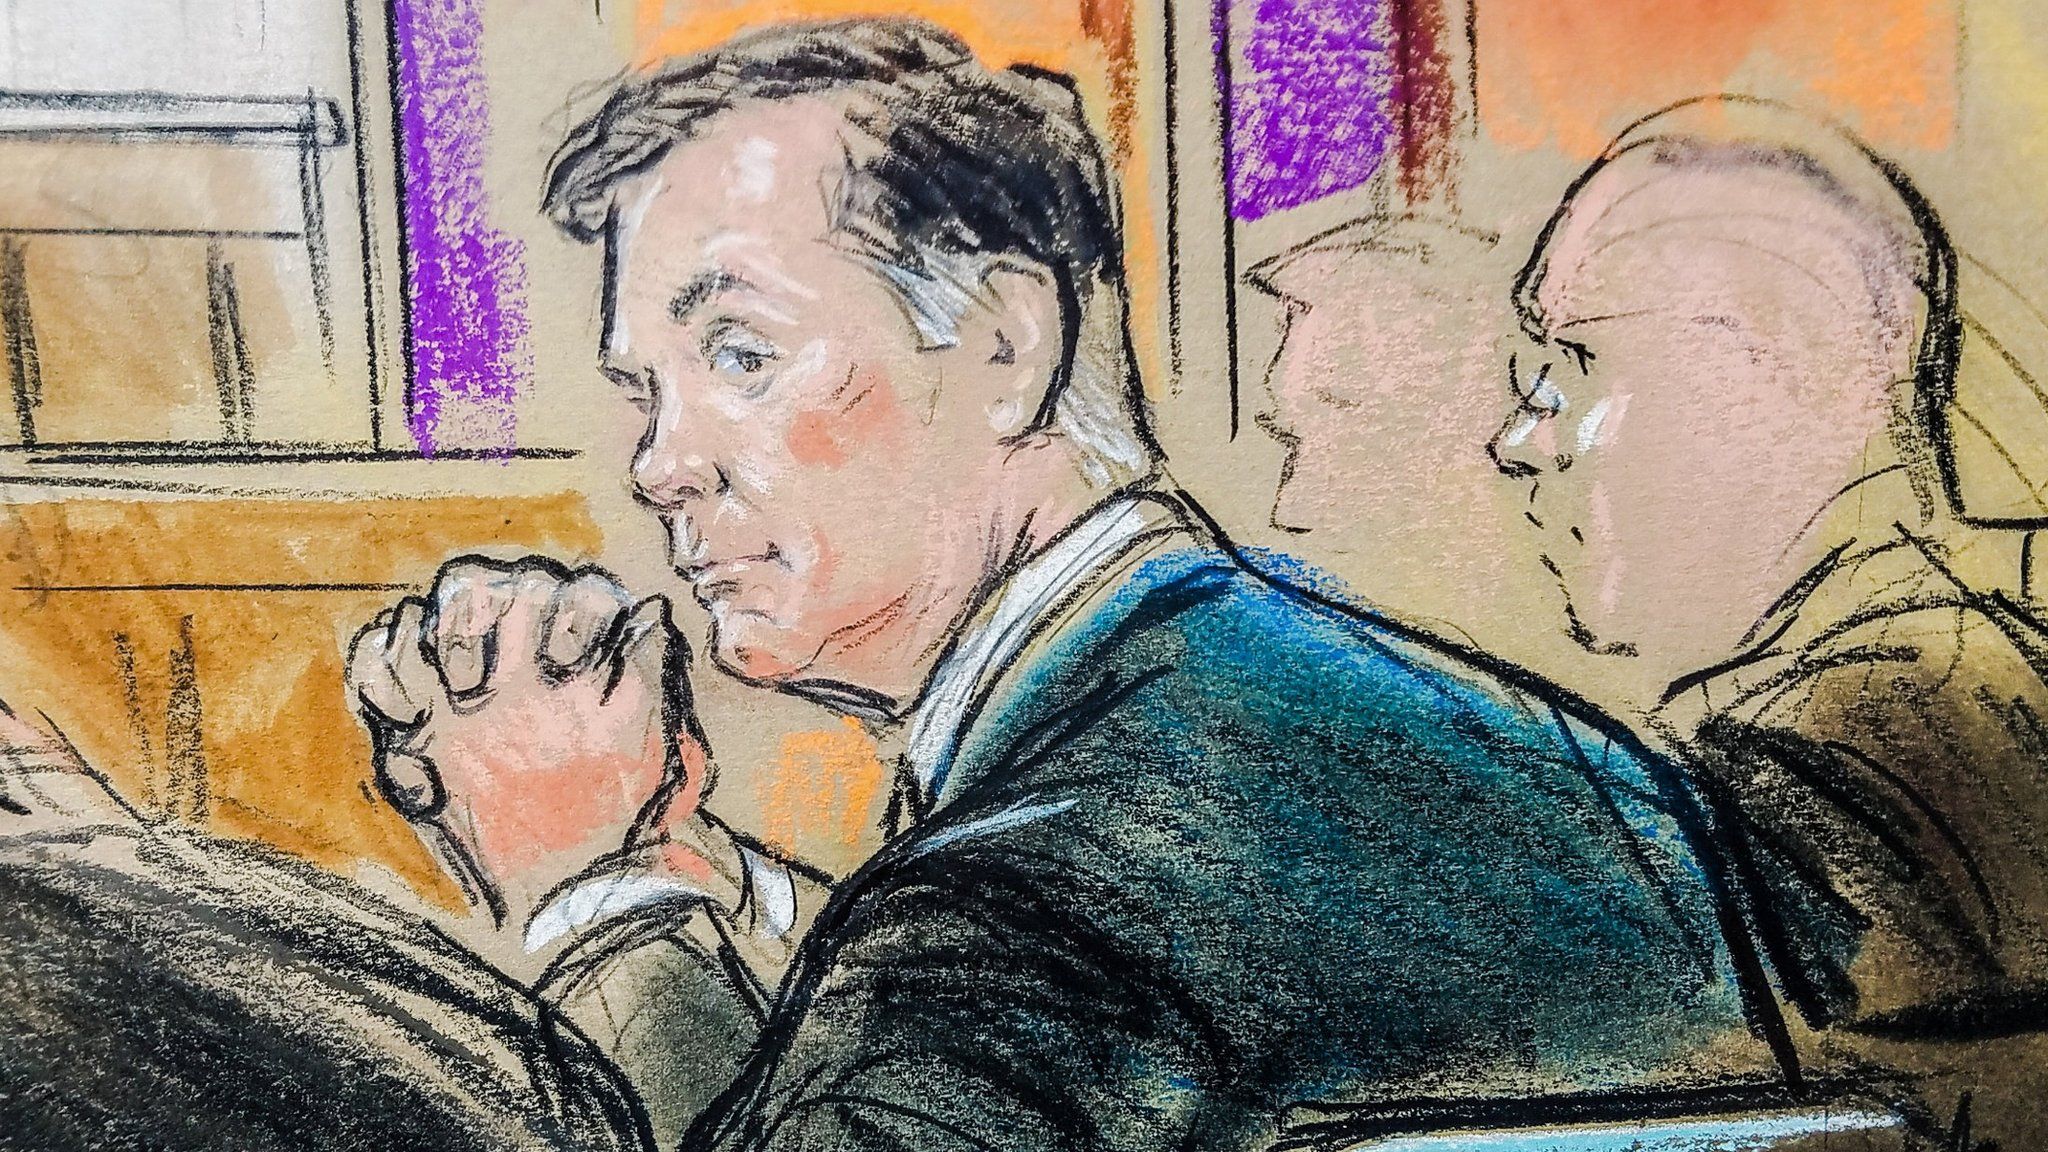 Paul Manafort is shown in a sketch as he sits in federal court on the opening day of his trial on bank and tax fraud charges stemming from Special Counsel Robert Mueller's investigation into Russian meddling in the 2016 presidential election, 31 July 2018